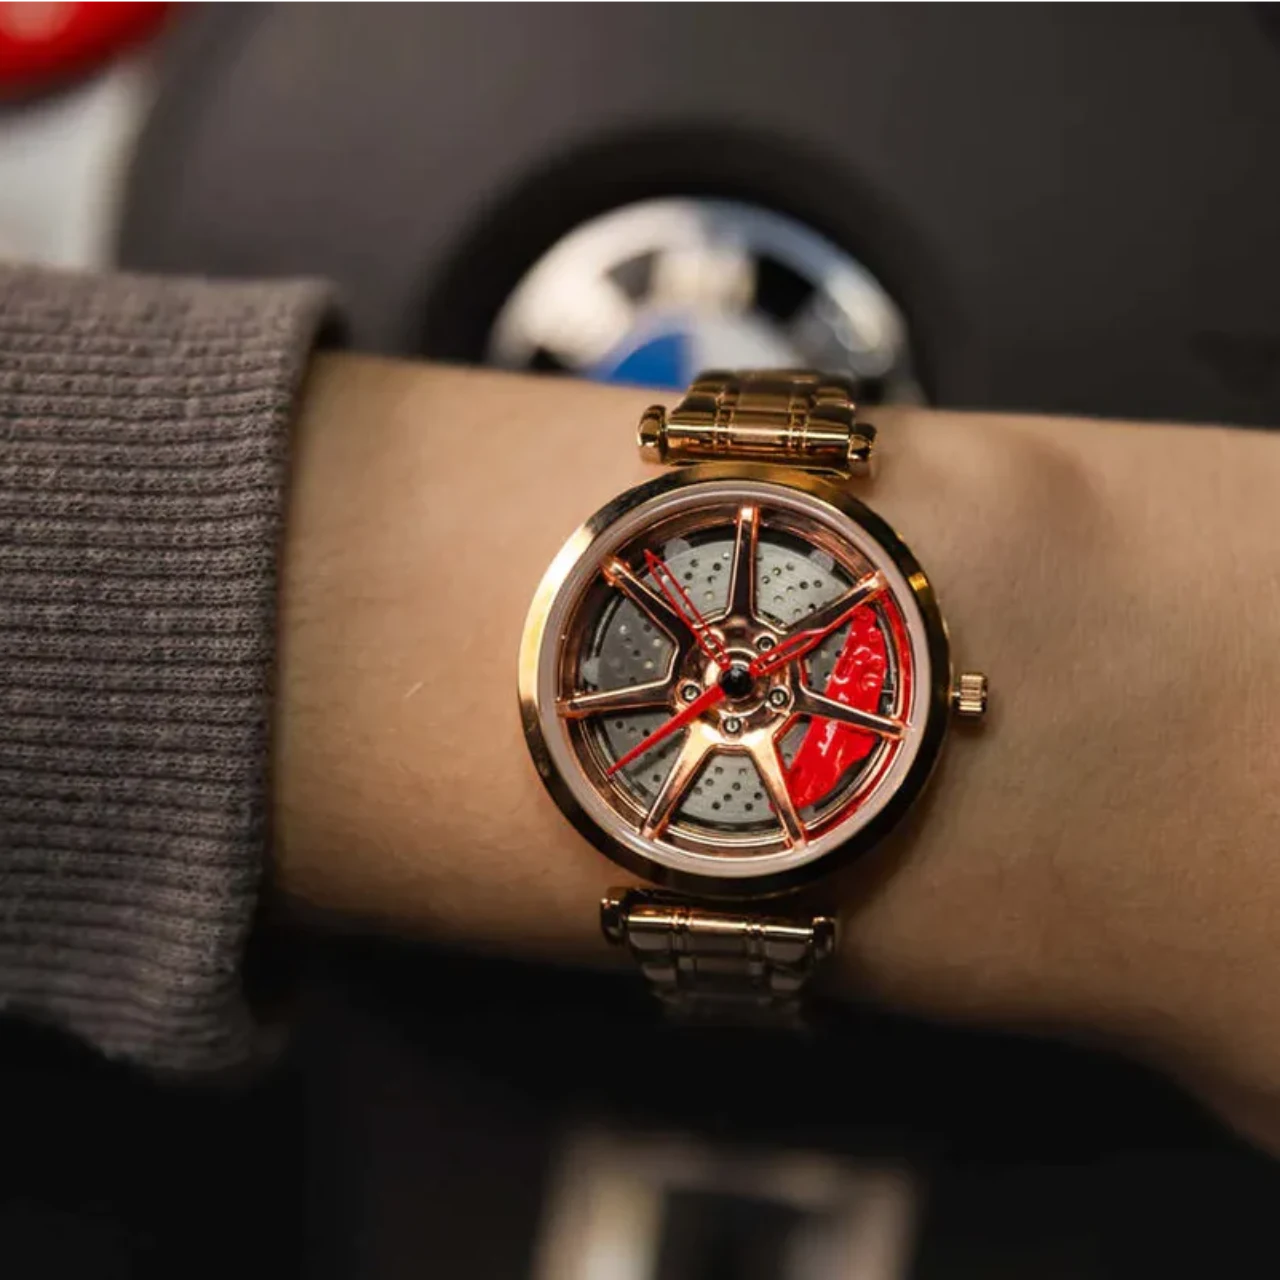 Elevate your fashion with our rose ladies' Rim Watch! Meticulously crafted by a German startup, these precision watches showcase innovative design. Designed to captivate motorsport, tuning, and auto enthusiasts. #id_46744378966346